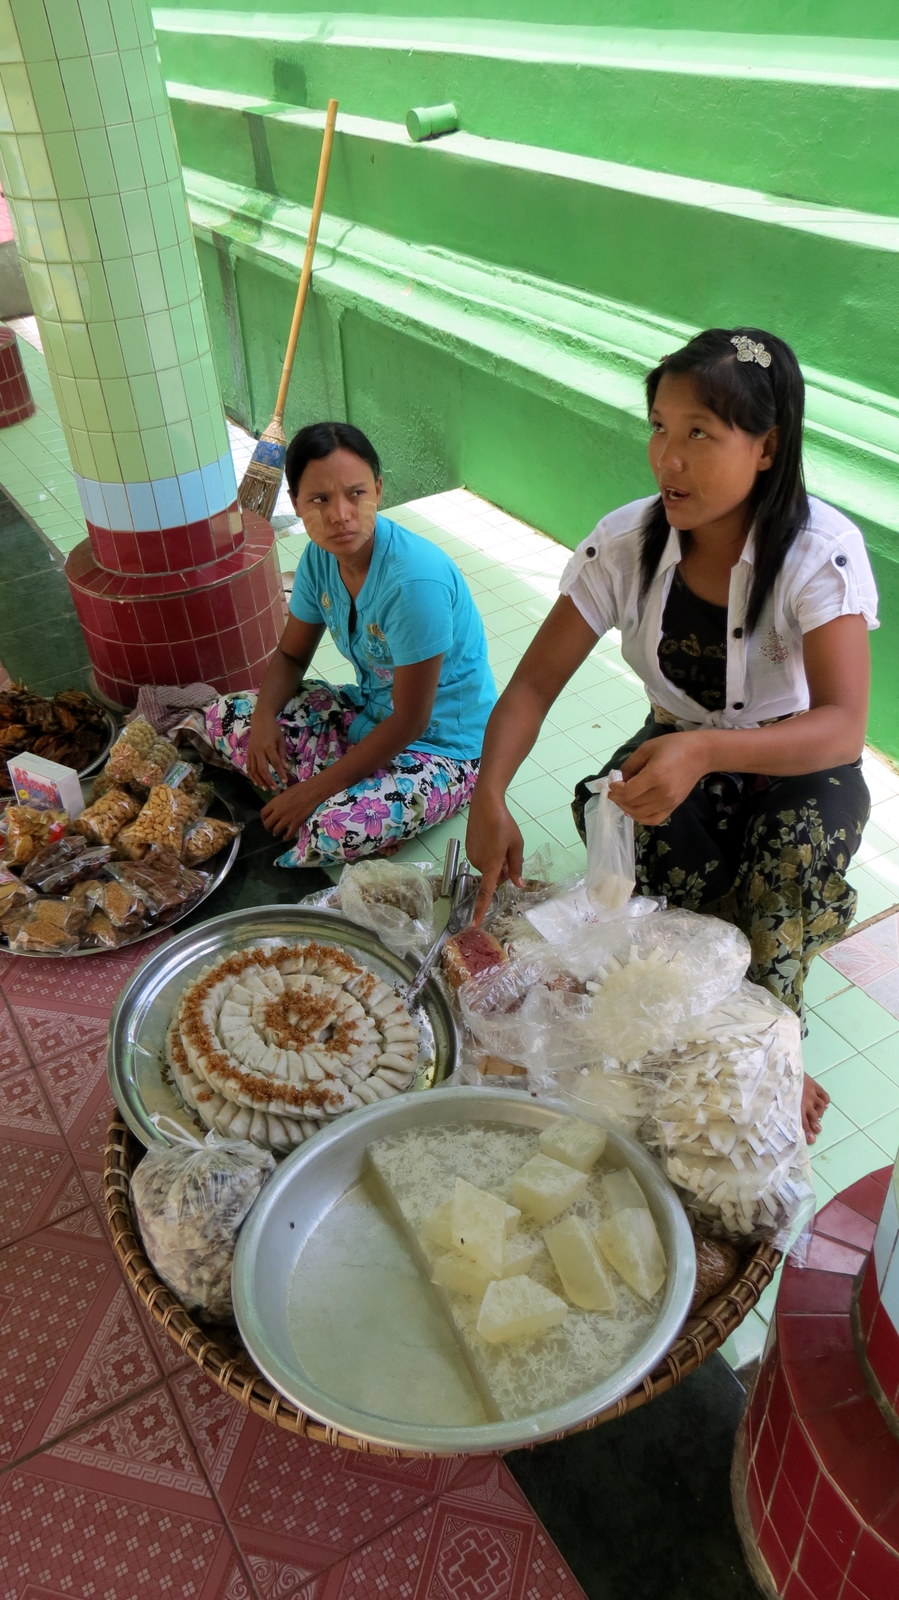 rice and coconut cake seller sagaing